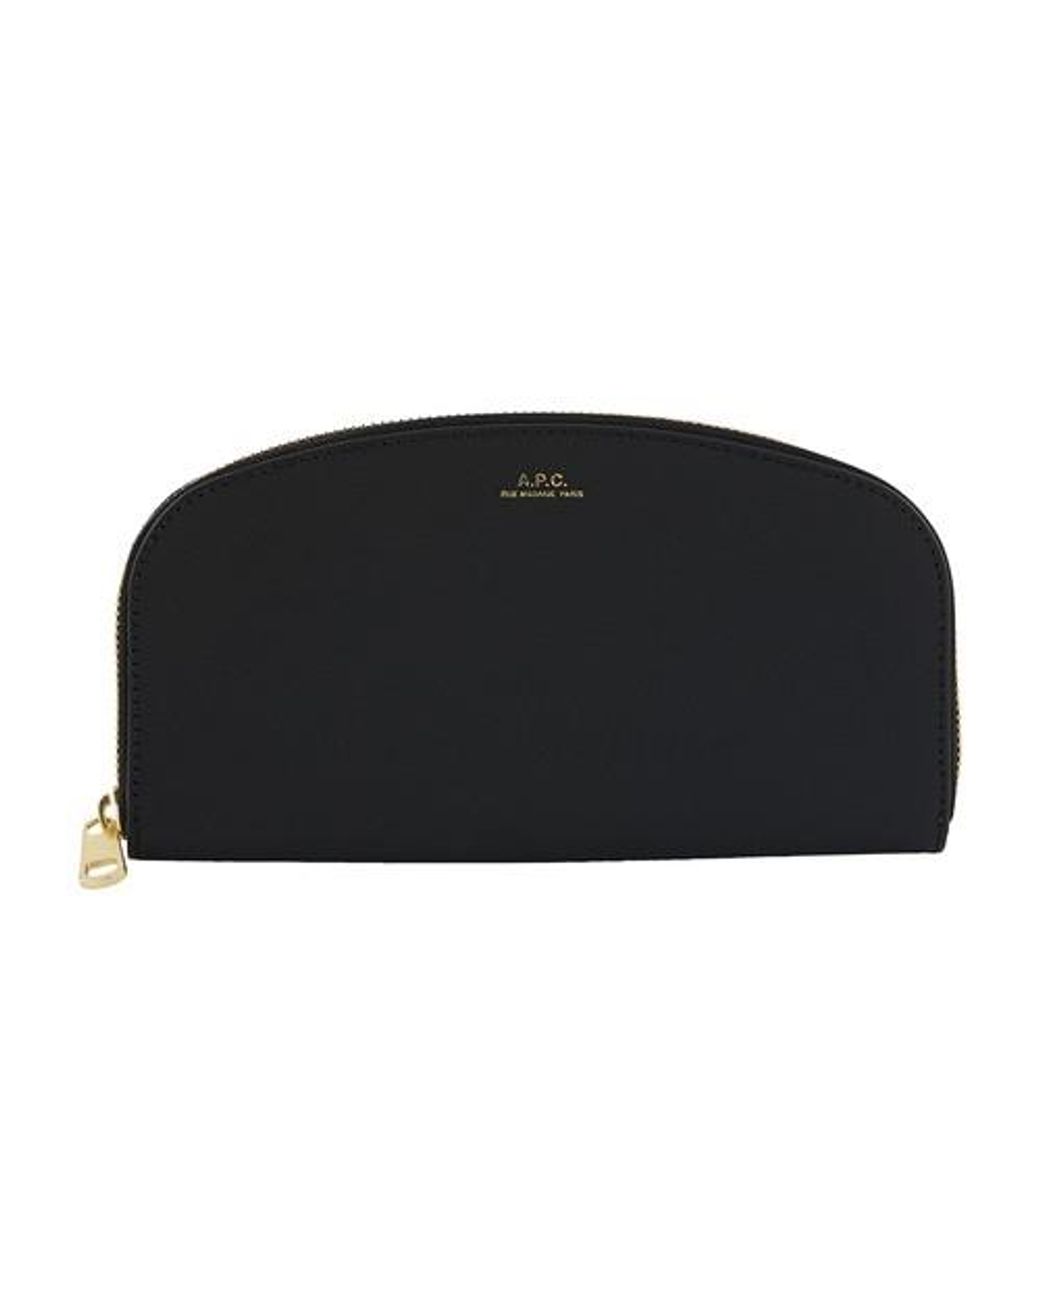 A.P.C. Half-moon Leather Wallet in Black | Lyst